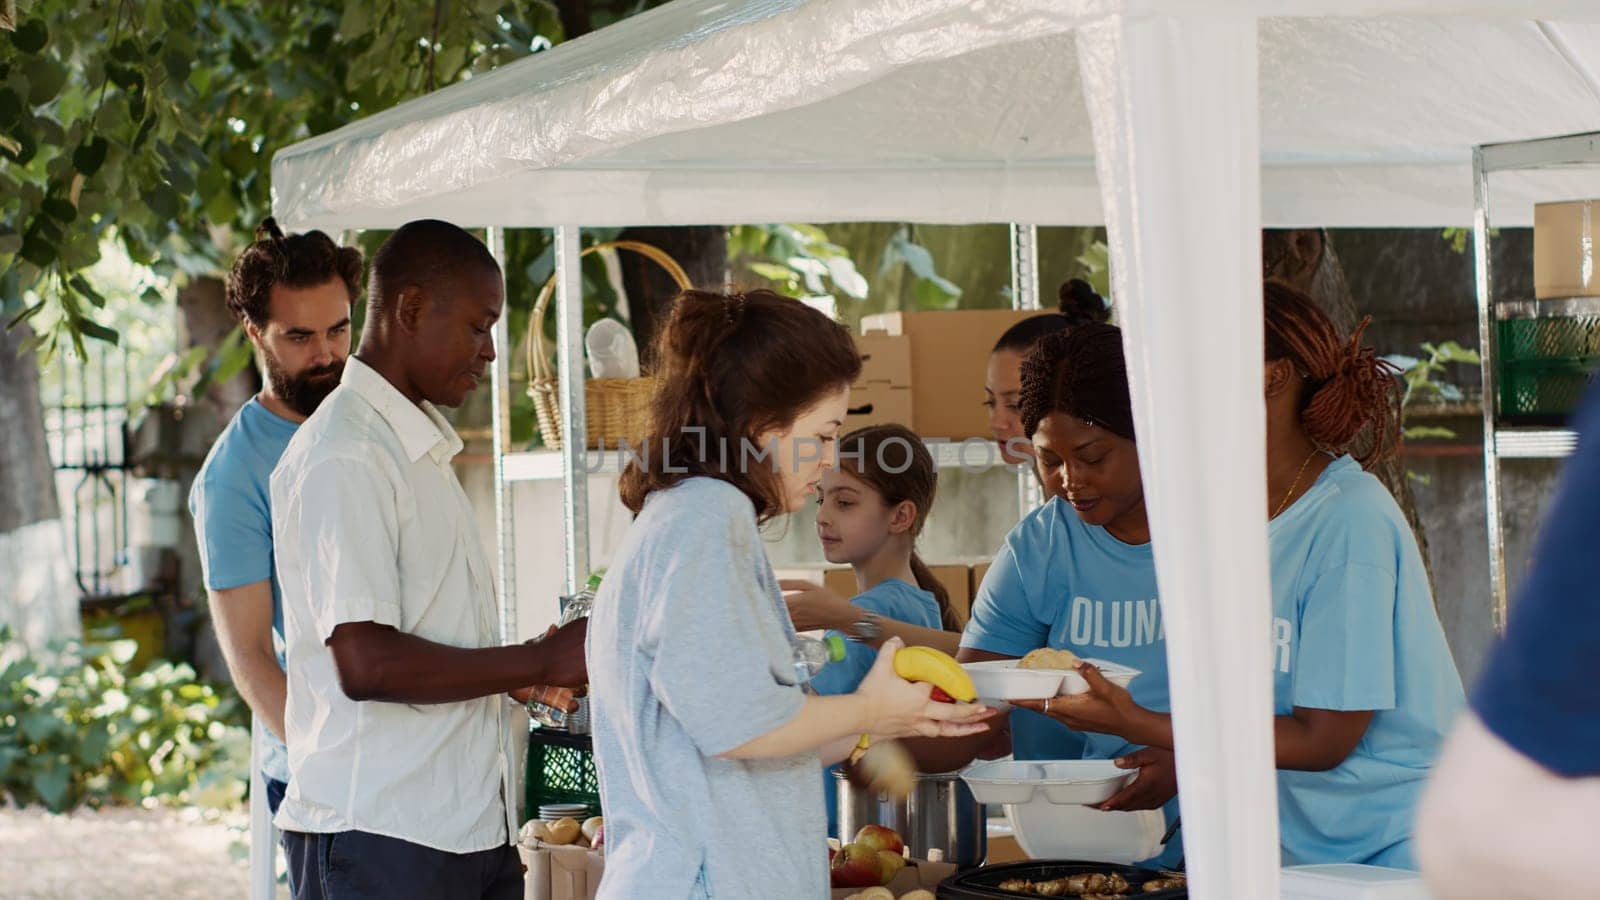 Friendly charity workers at food drive distributing necessities and free food to underprivileged. Voluntary individuals helping to fight hunger by providing hot meals to needy and homeless people.